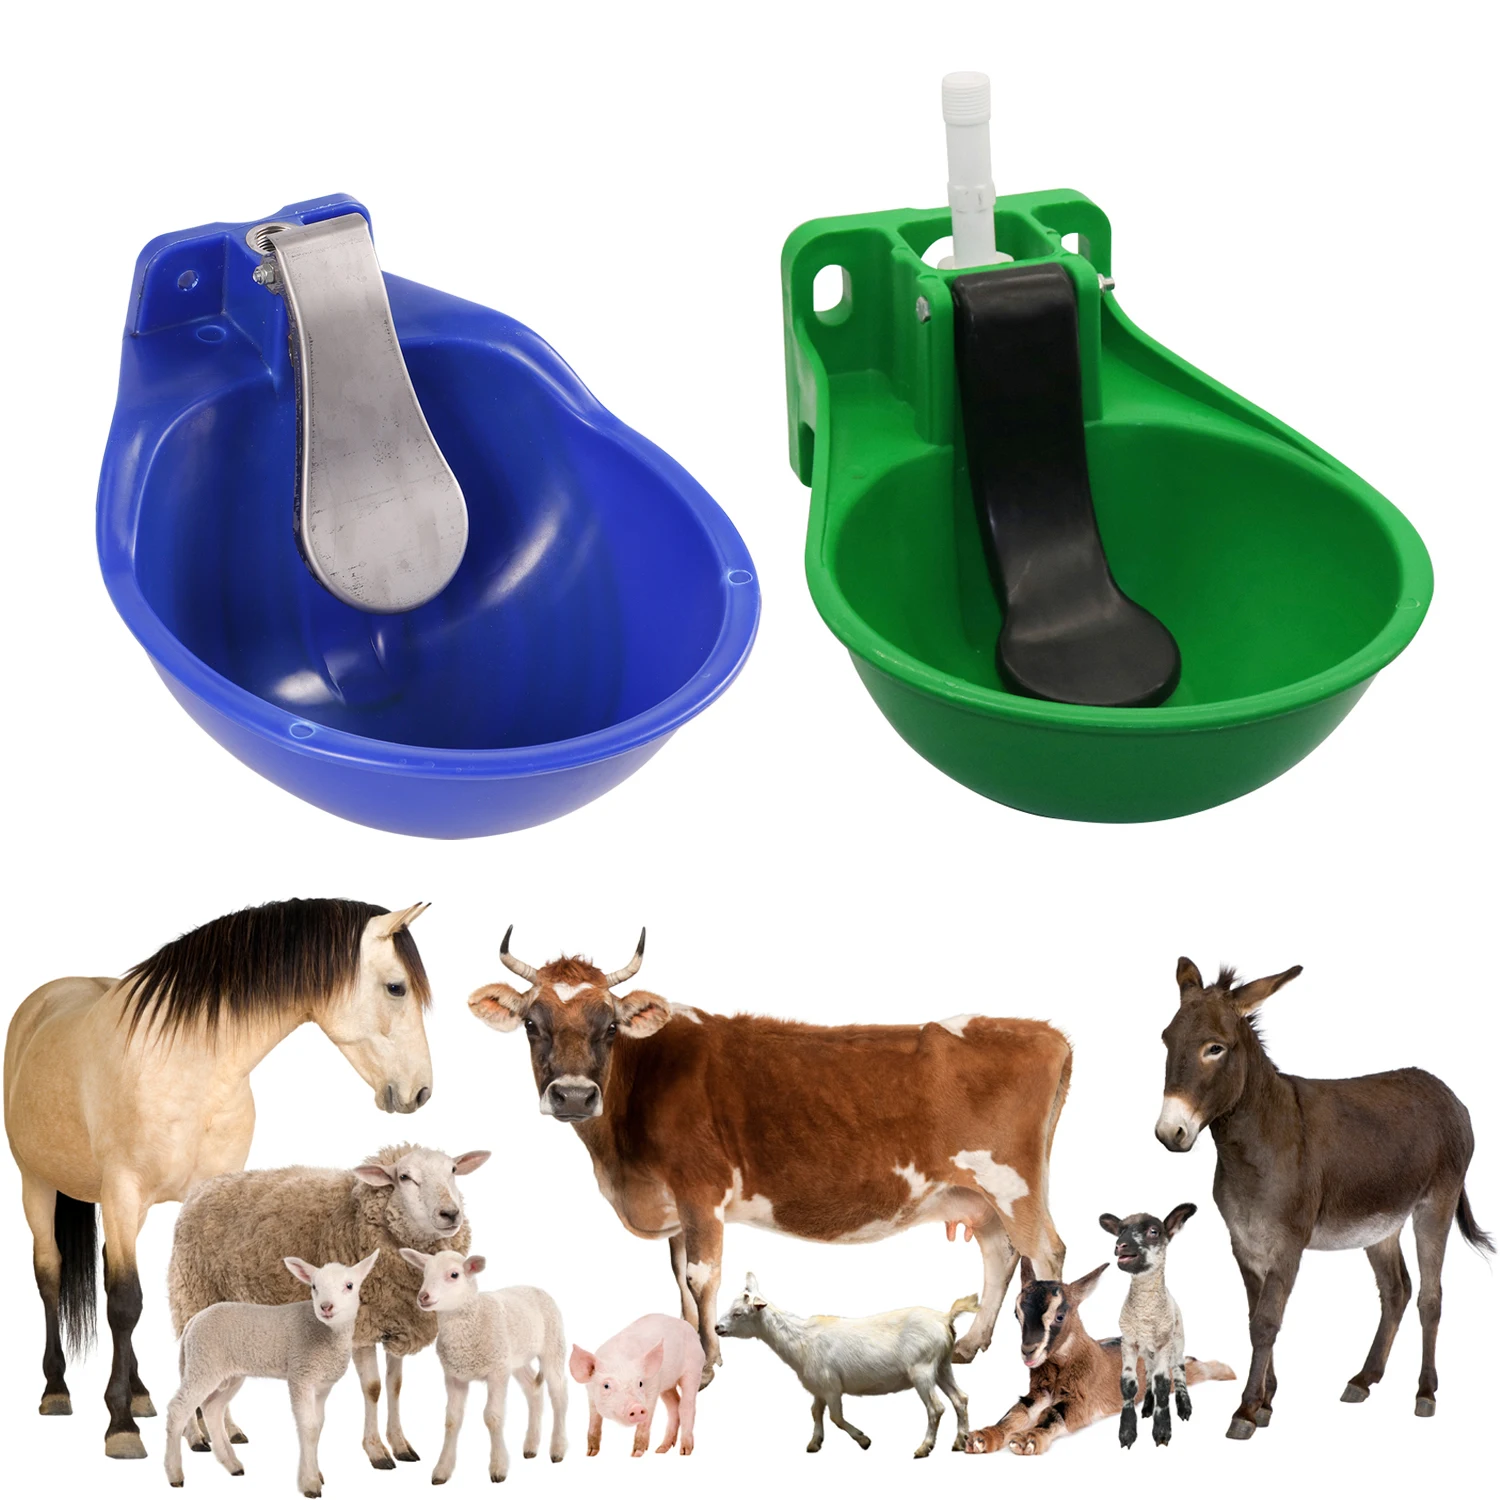 

Bowl Water Water Drinker Automatic Livestock Tongue Farm Drinking Feeding Bowl Cattle Animal Horse Bowl Cow Eqipment Goat Steel